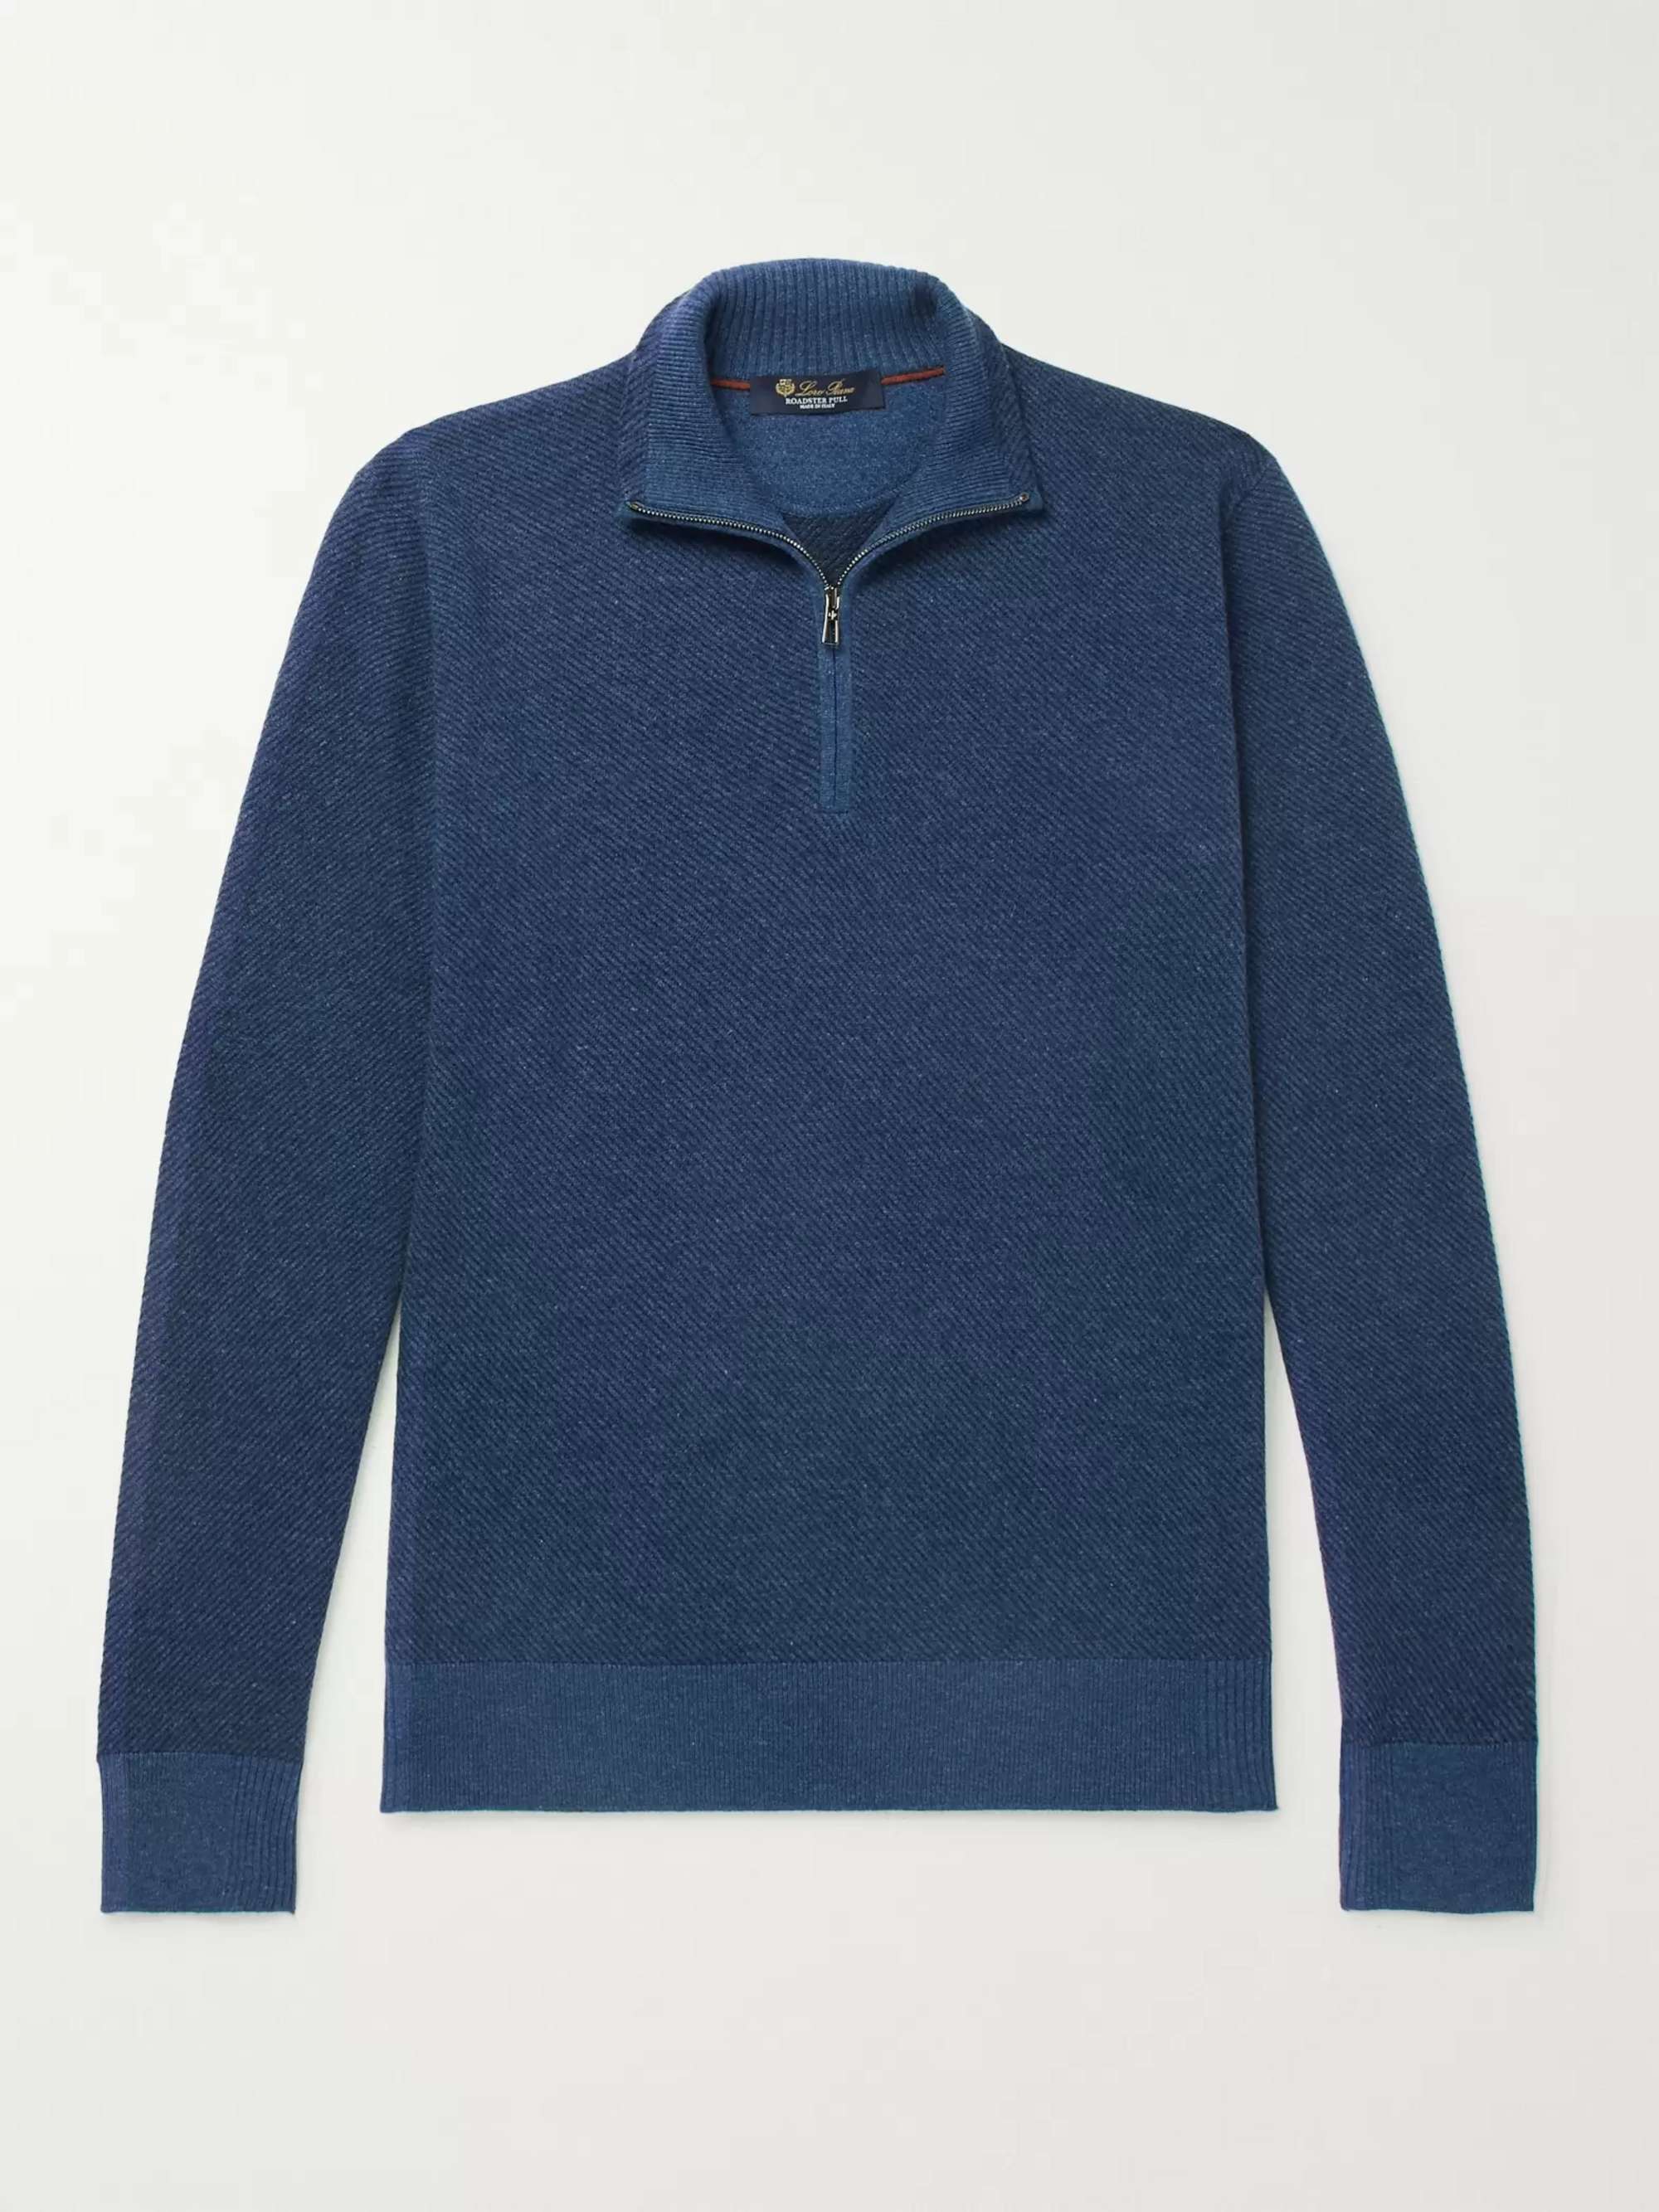 Loro Piana Roadster Cashmere Half-zip Sweater in Blue for Men Mens Clothing Sweaters and knitwear Zipped sweaters 